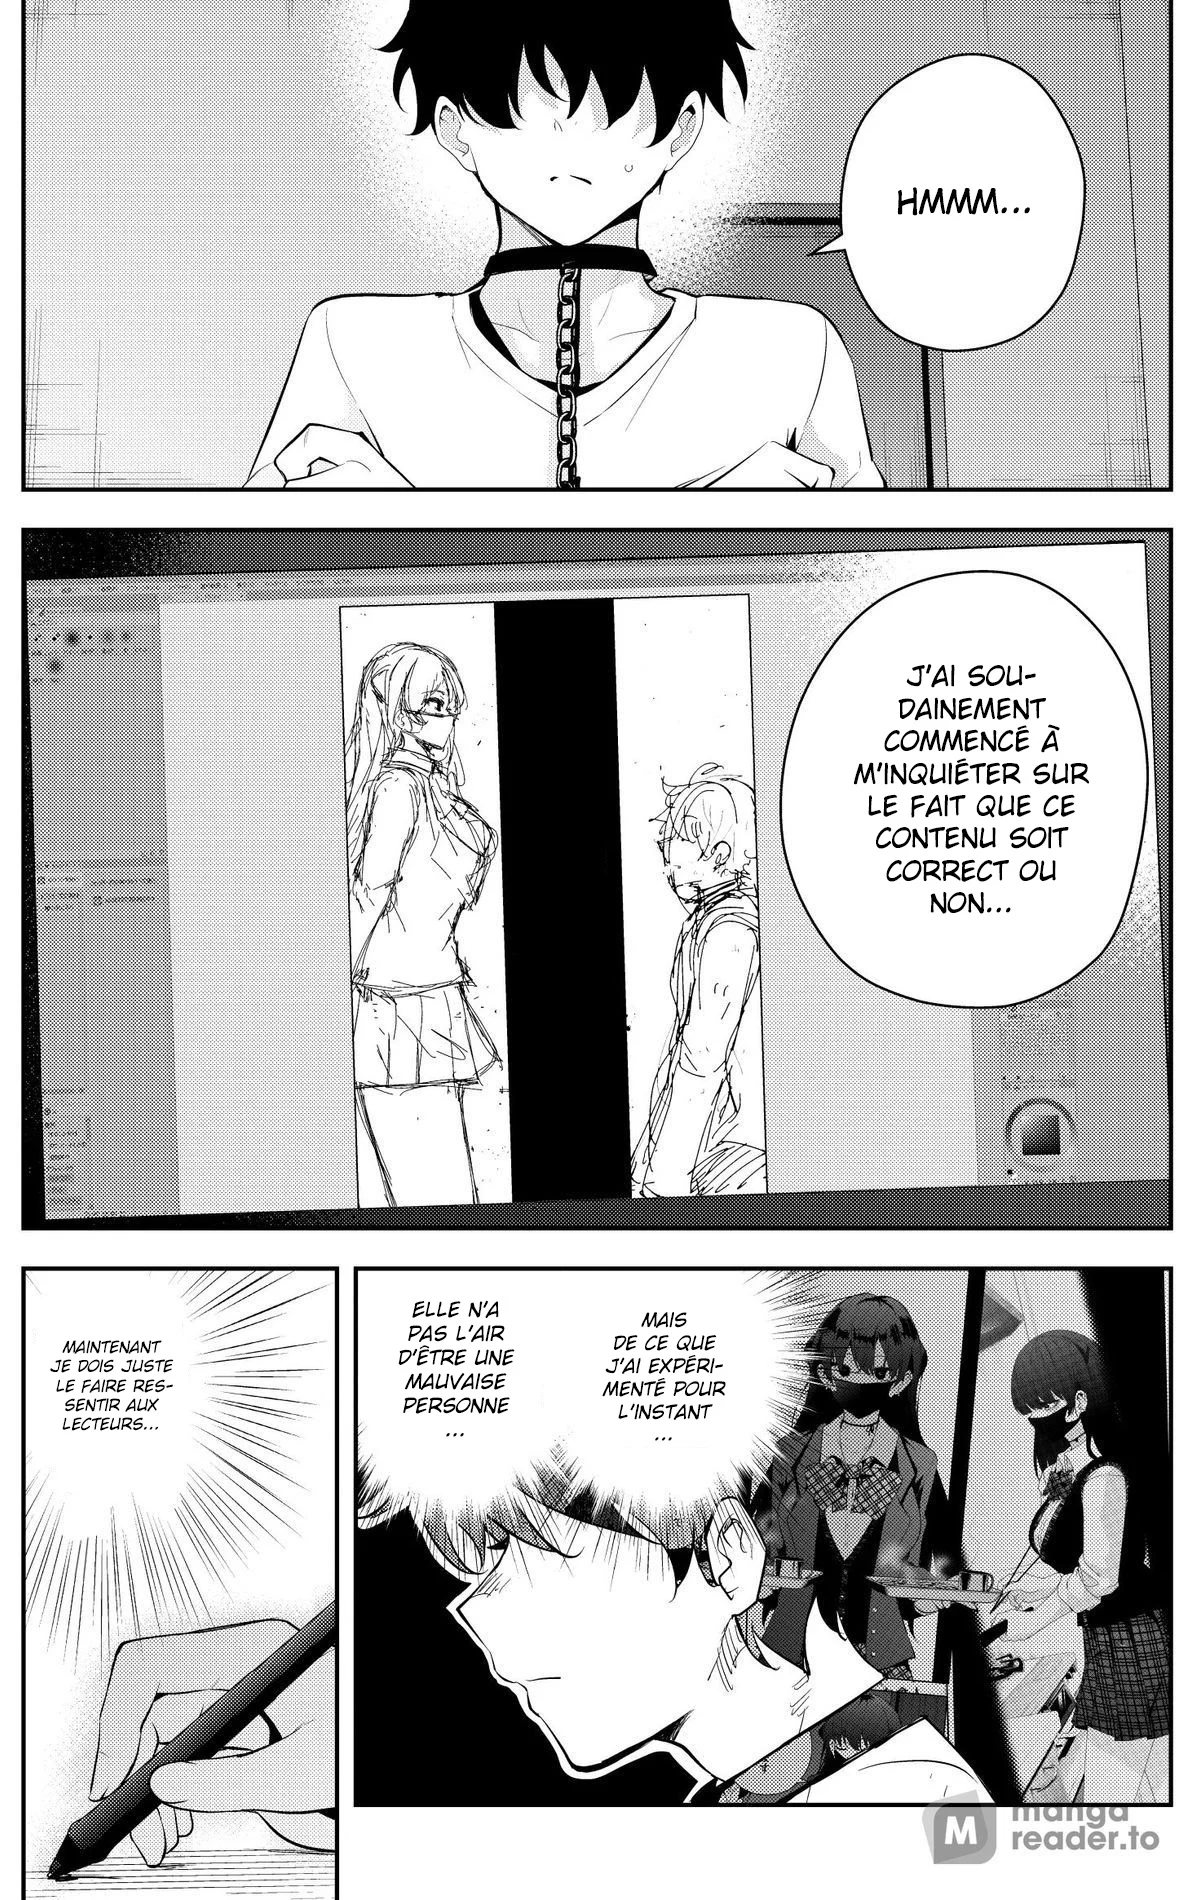 The Story Of A Manga Artist Confined By A Strange High School Girl: Chapter 18 - Page 1